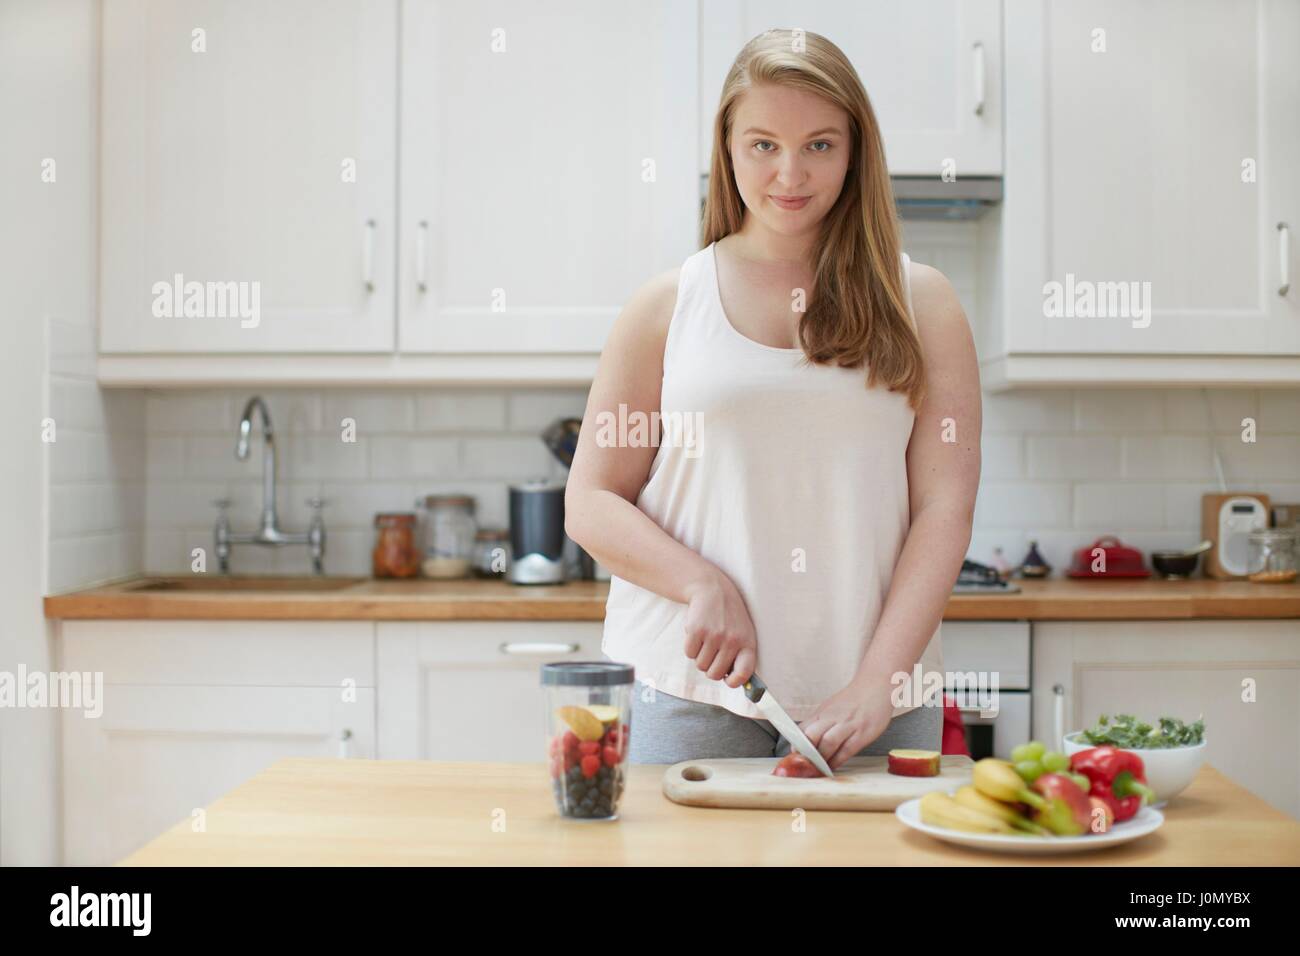 Young woman preparing healthy food in kitchen. Stock Photo